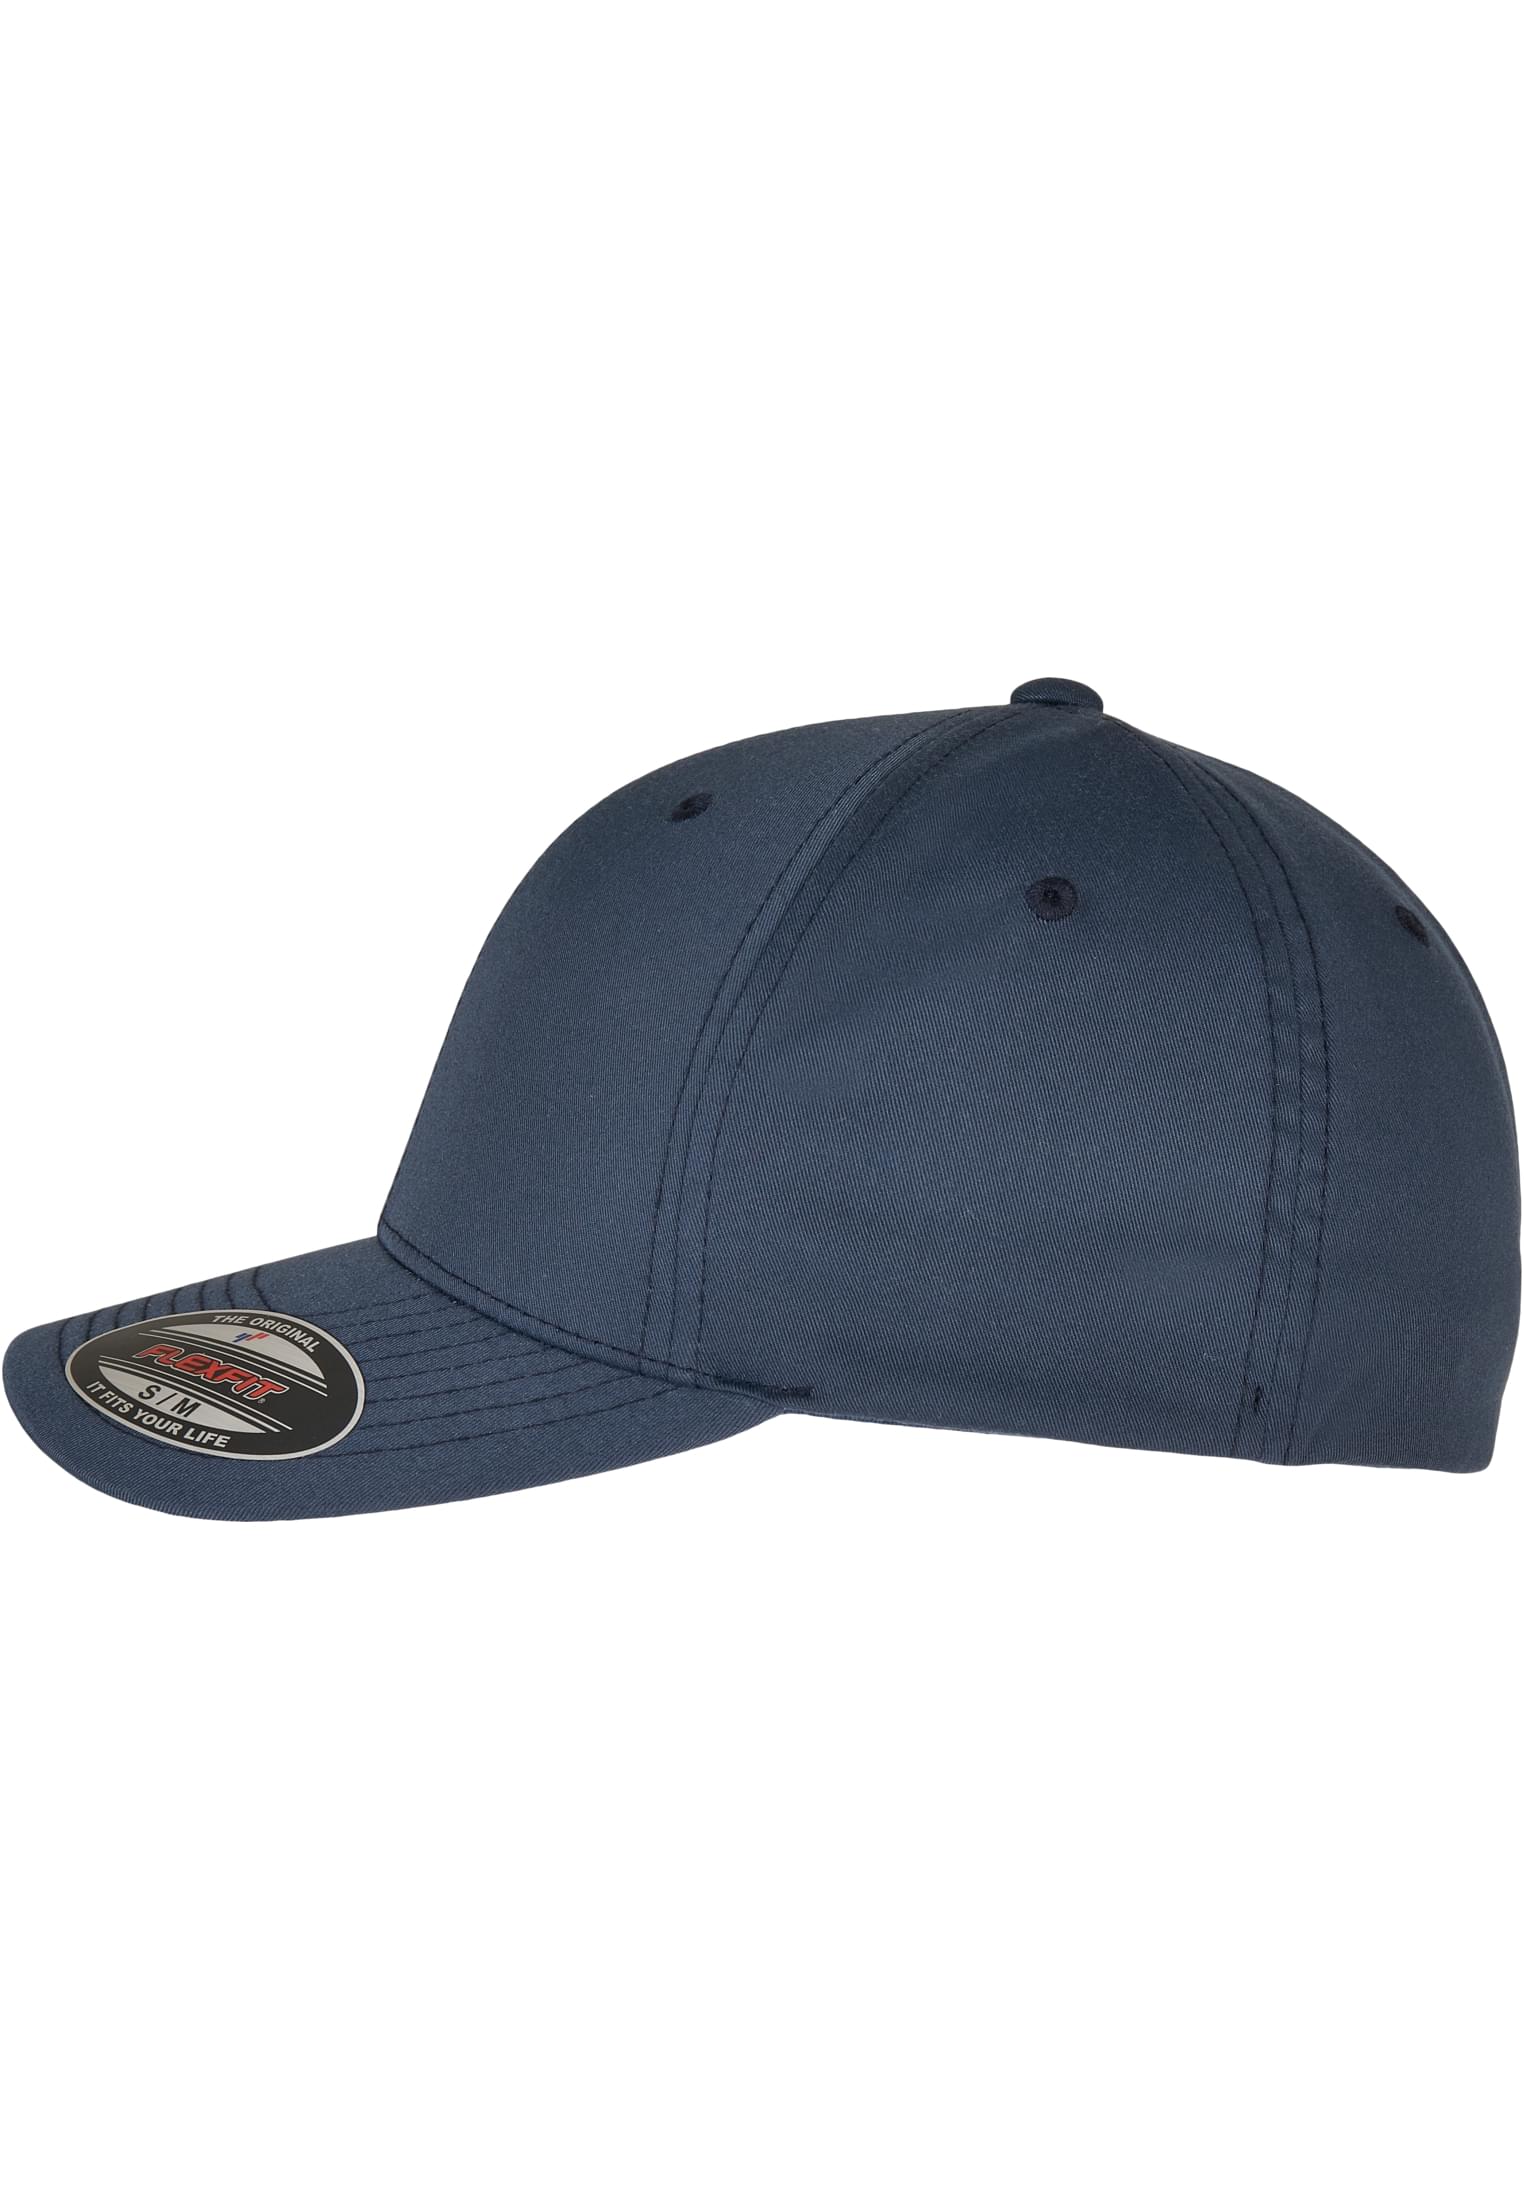 Recycled Cap-6277RP Flexfit Polyester